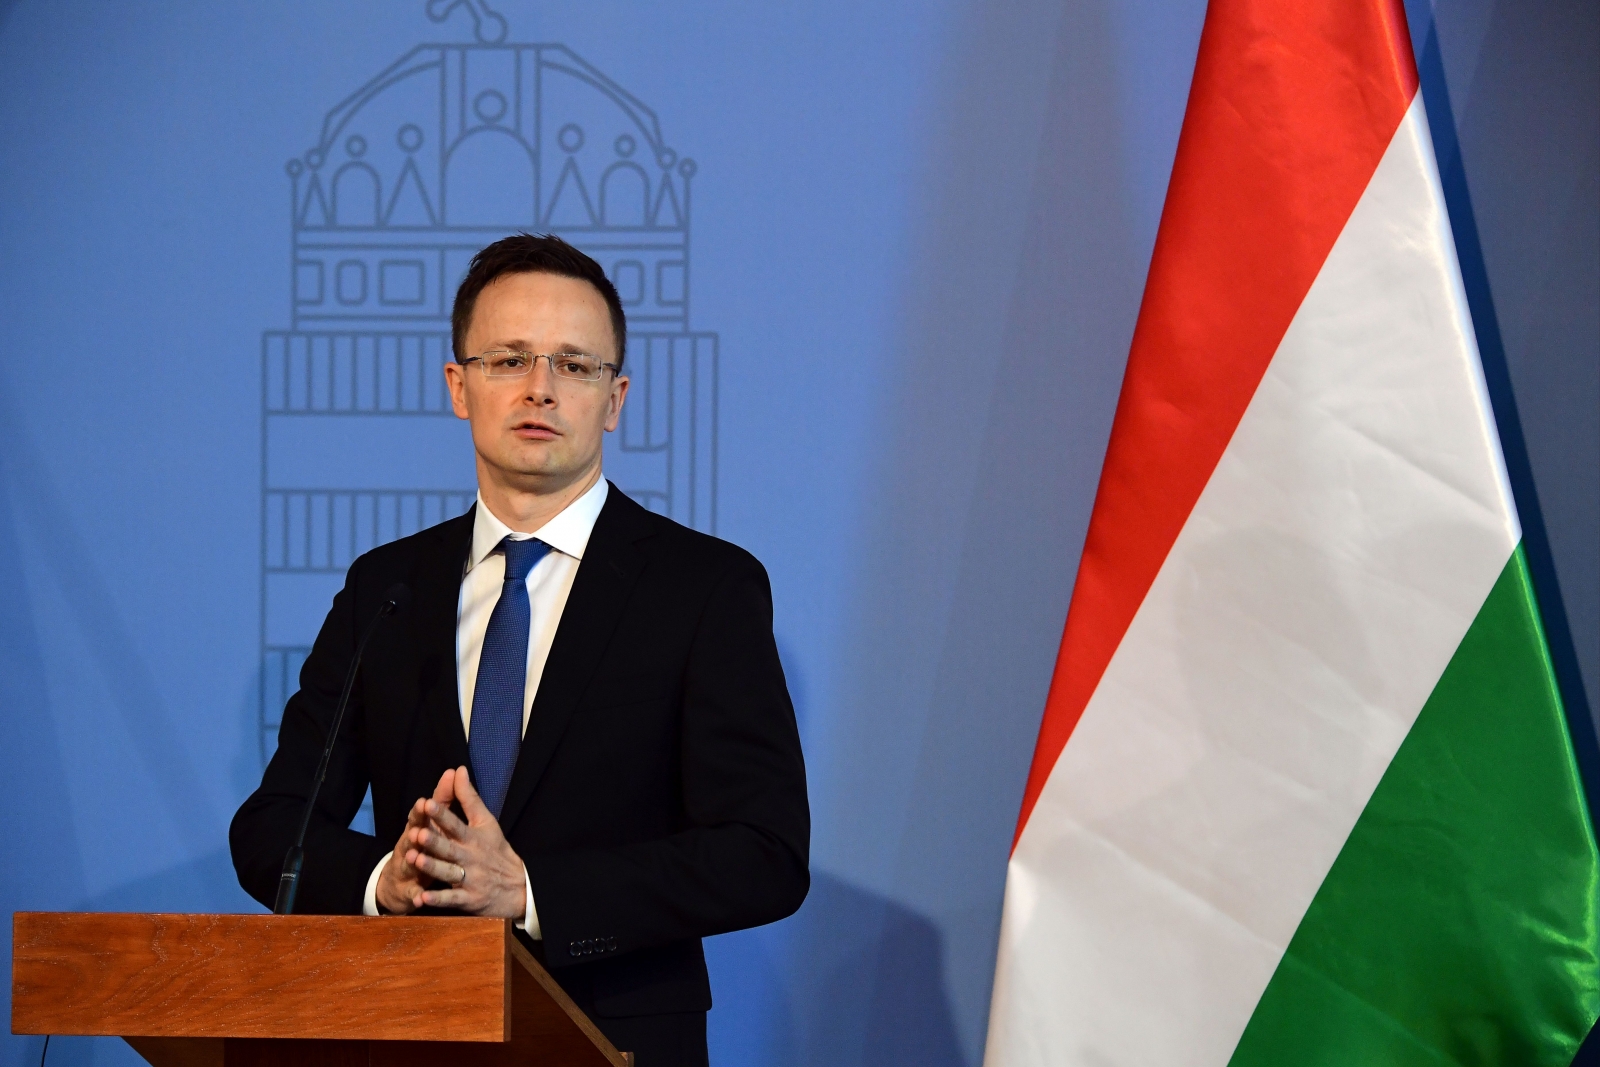 EU referendum: Hungary to seek India's help for businesses in the UK after Brexit